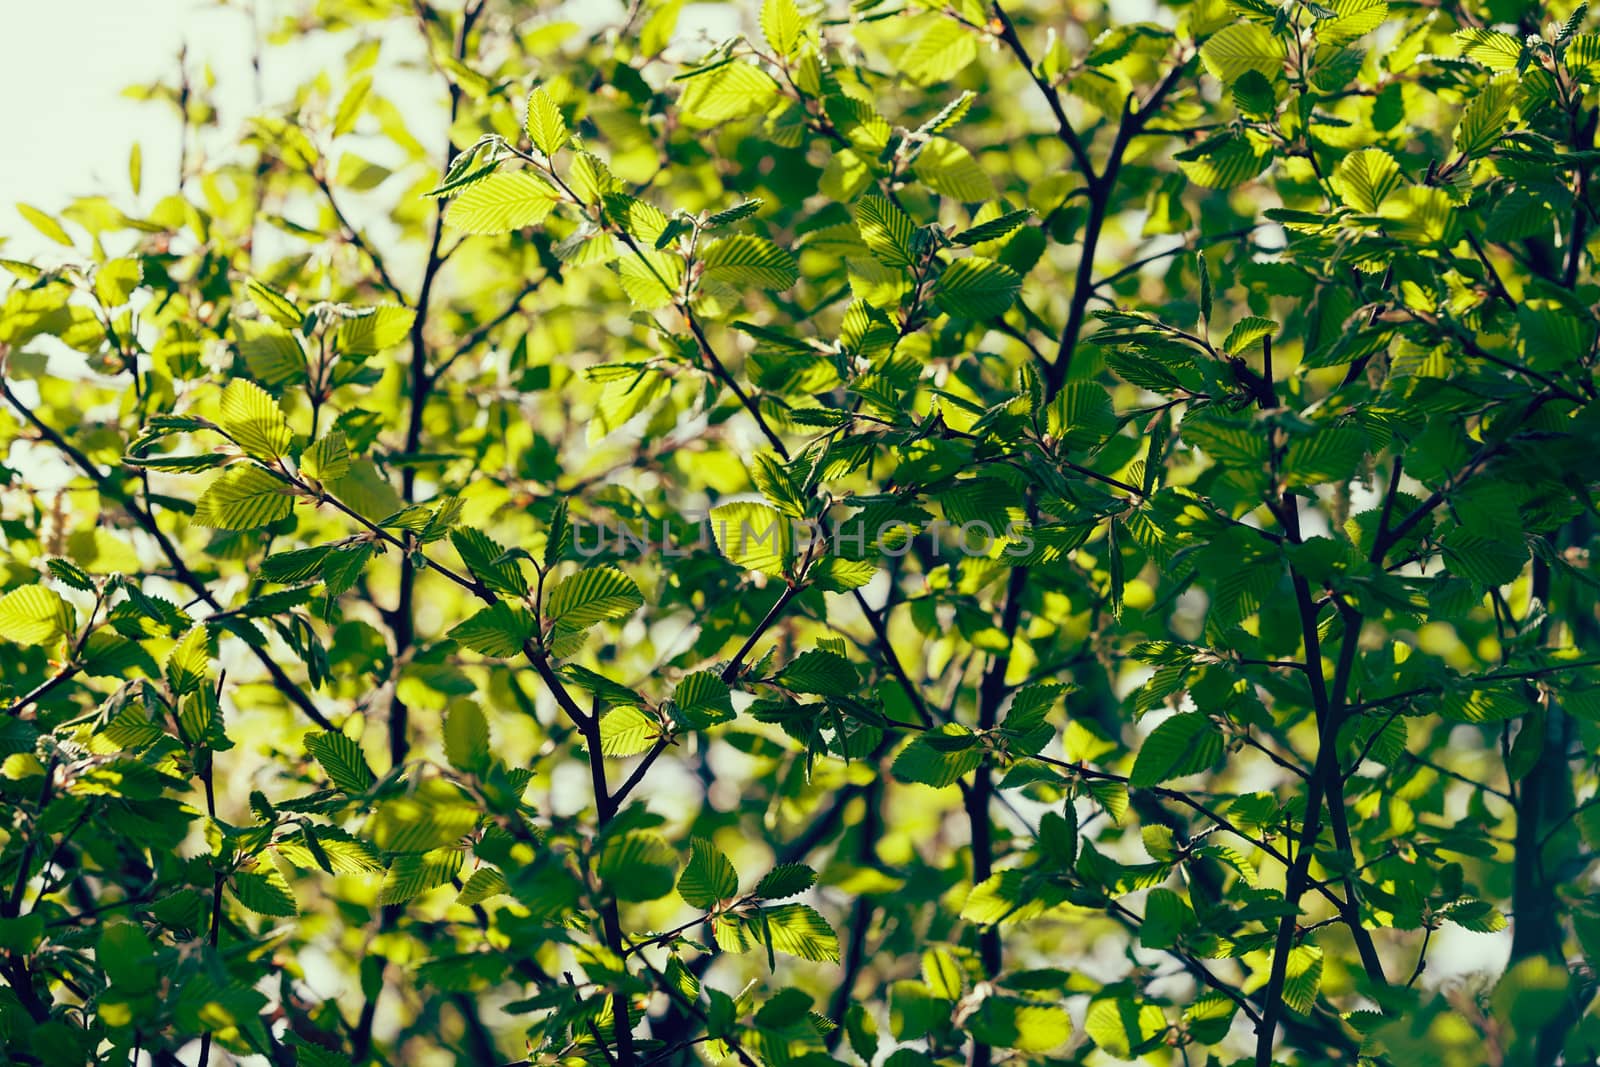 focus on green leaves in nature, note shallow depth of field